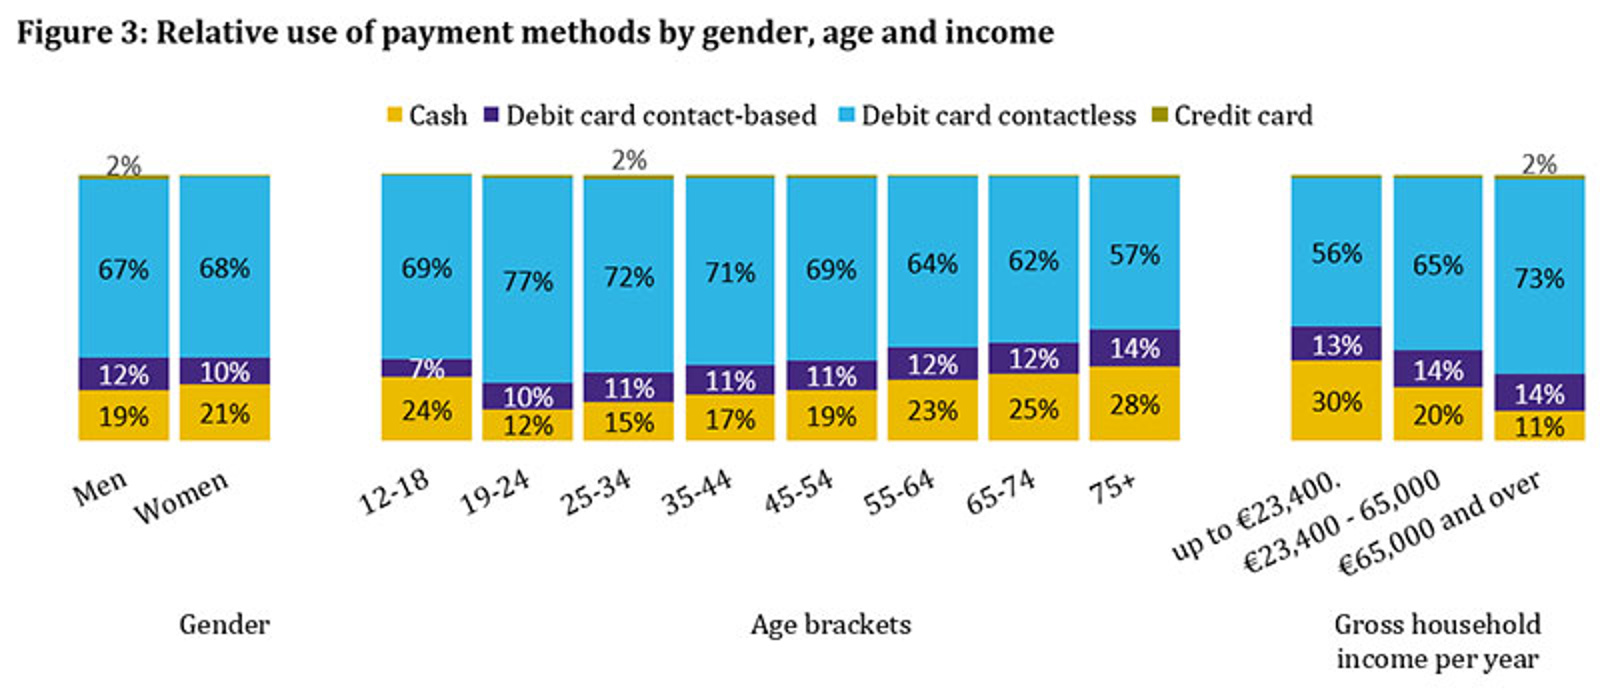 Relative use of payment methods by gender, age and income